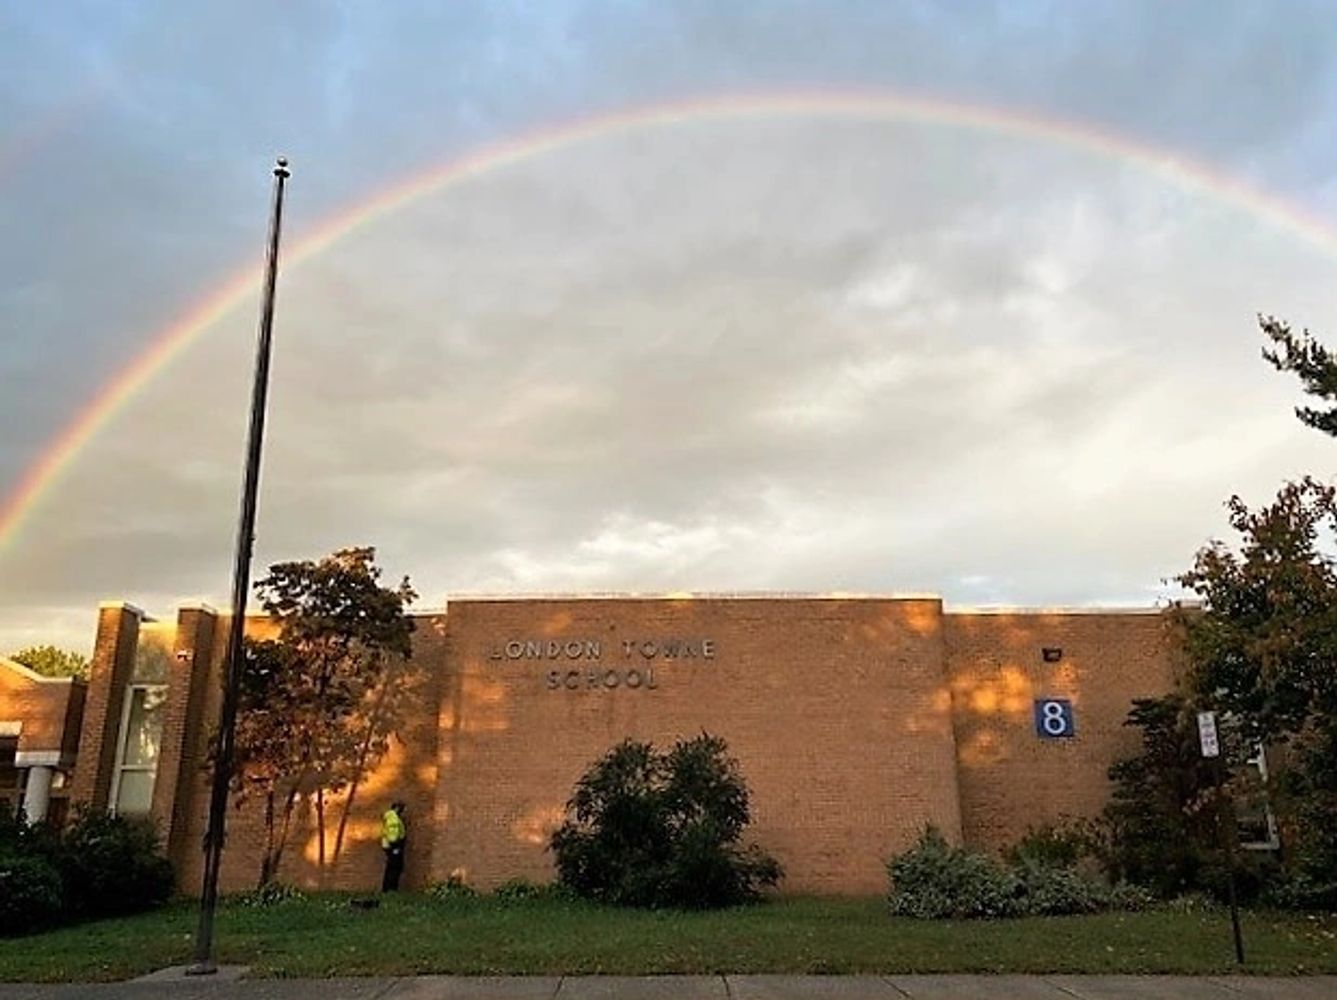 London Towne Elementary School Building with a rainbow